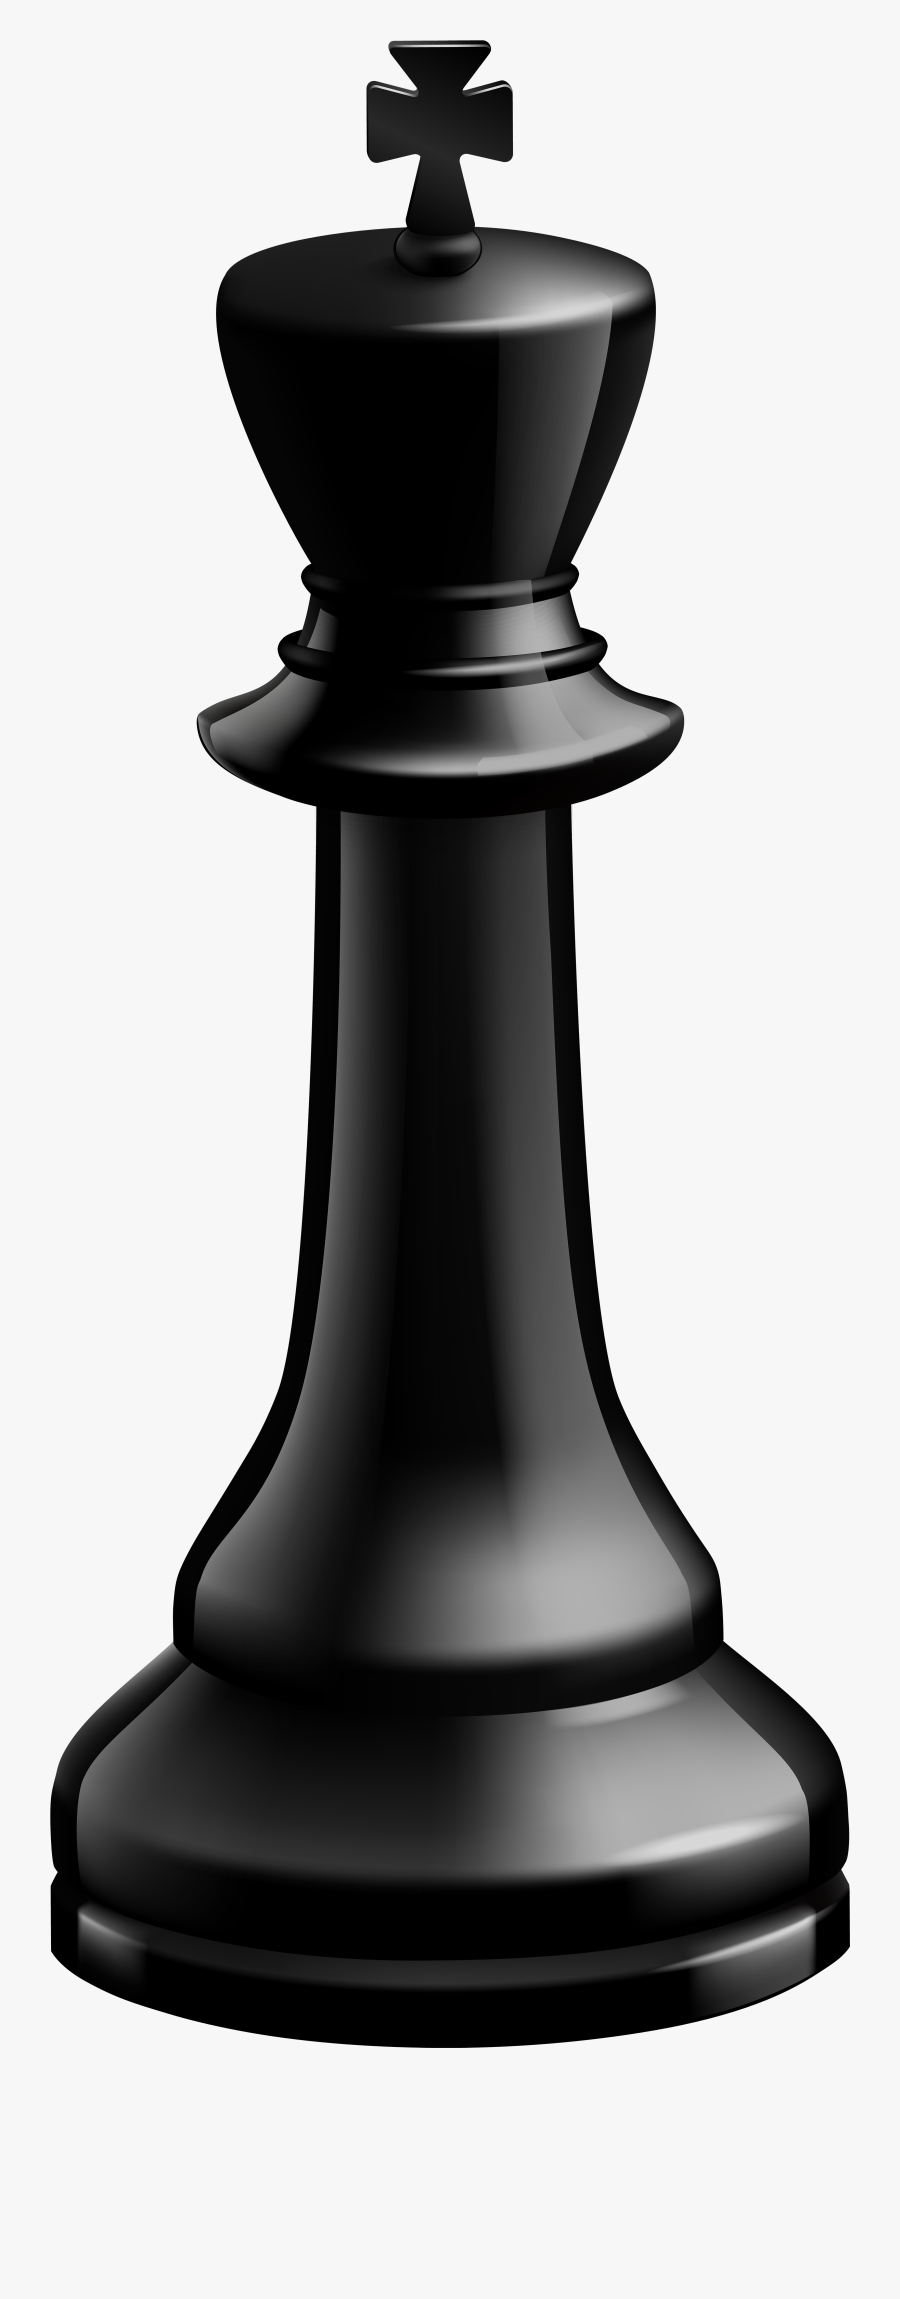 King Black Chess Piece Png Clip Art - Black King Chess Piece Png, Transparent Clipart